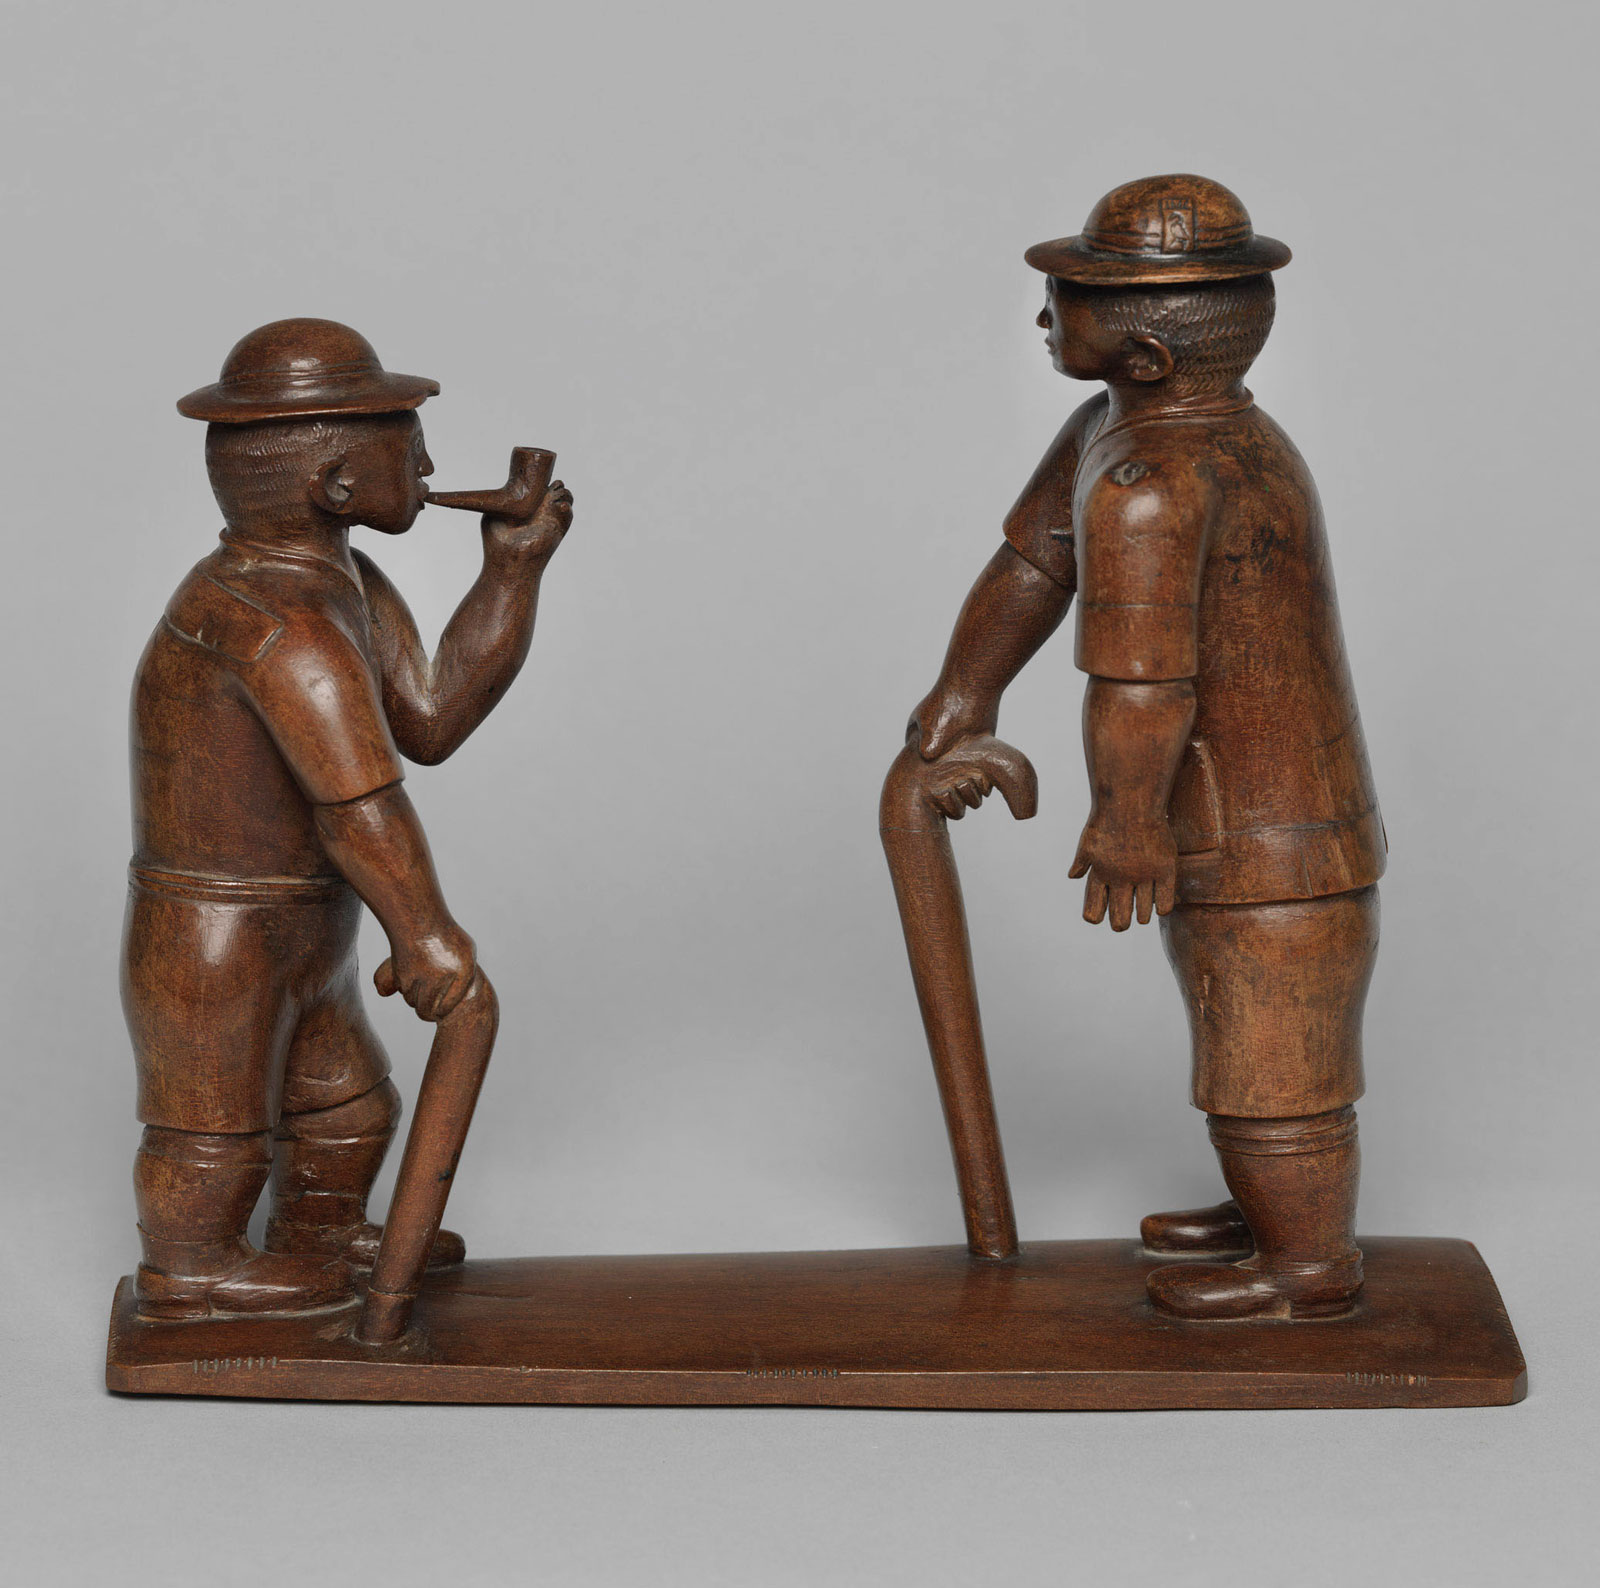 Kamba artist: Two European figures standing on a base, one with a stick and the other holding a pipe, circa 1900